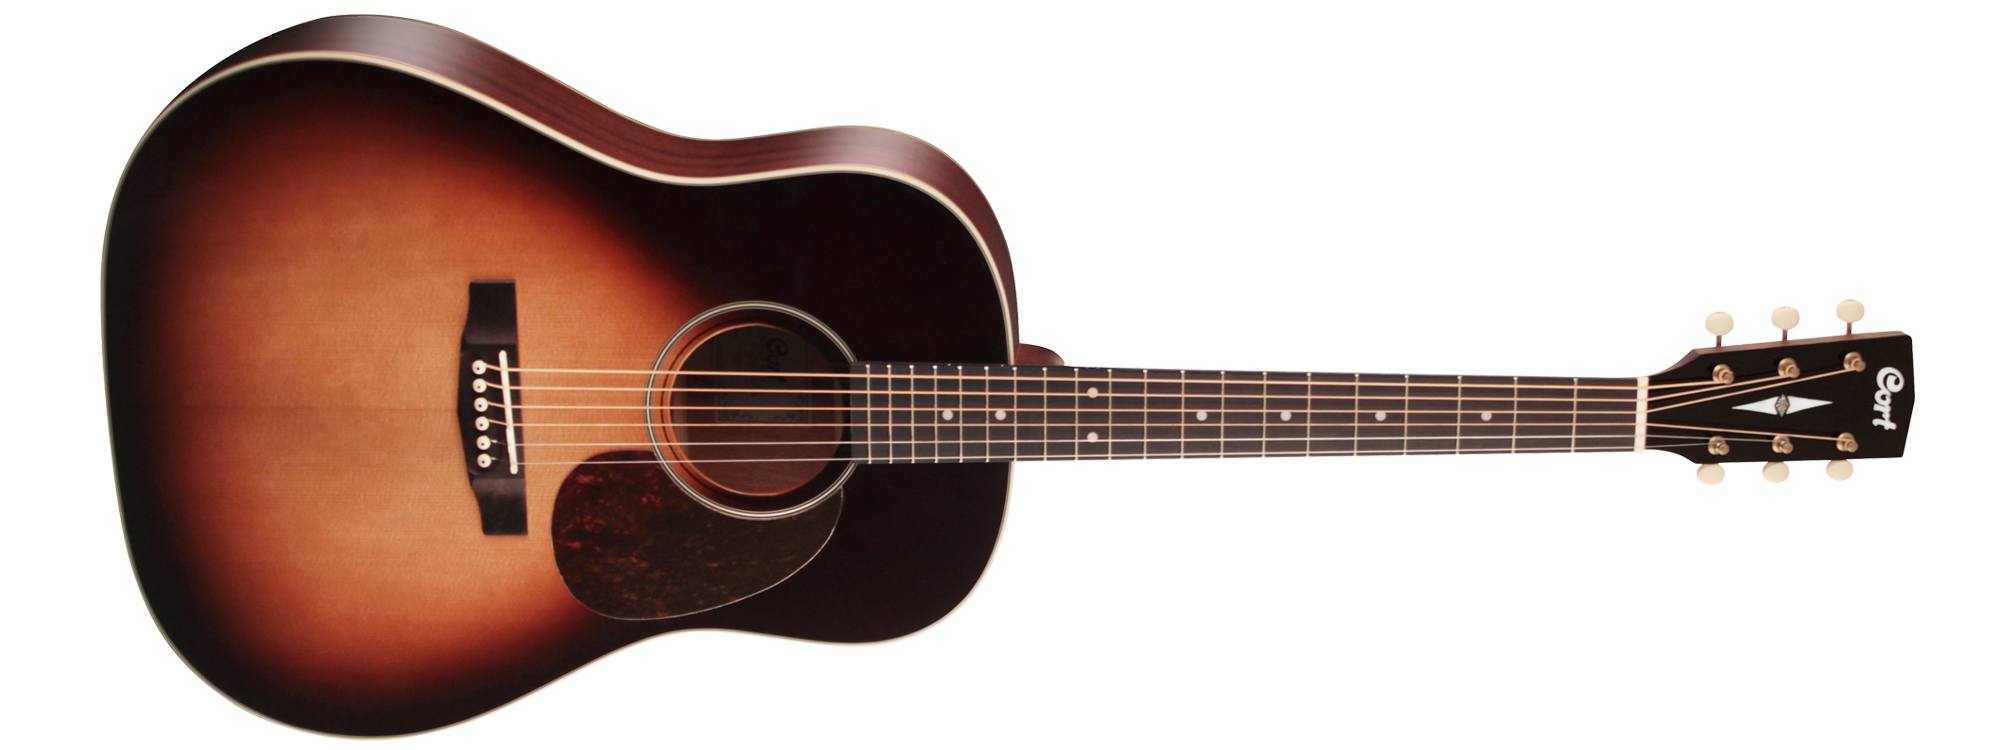 Cort Earth 100 SSF Electro Acoustic Guitar Sunburst w/ Fishman Sonitone, Electro Acoustic Guitar for sale at Richards Guitars.